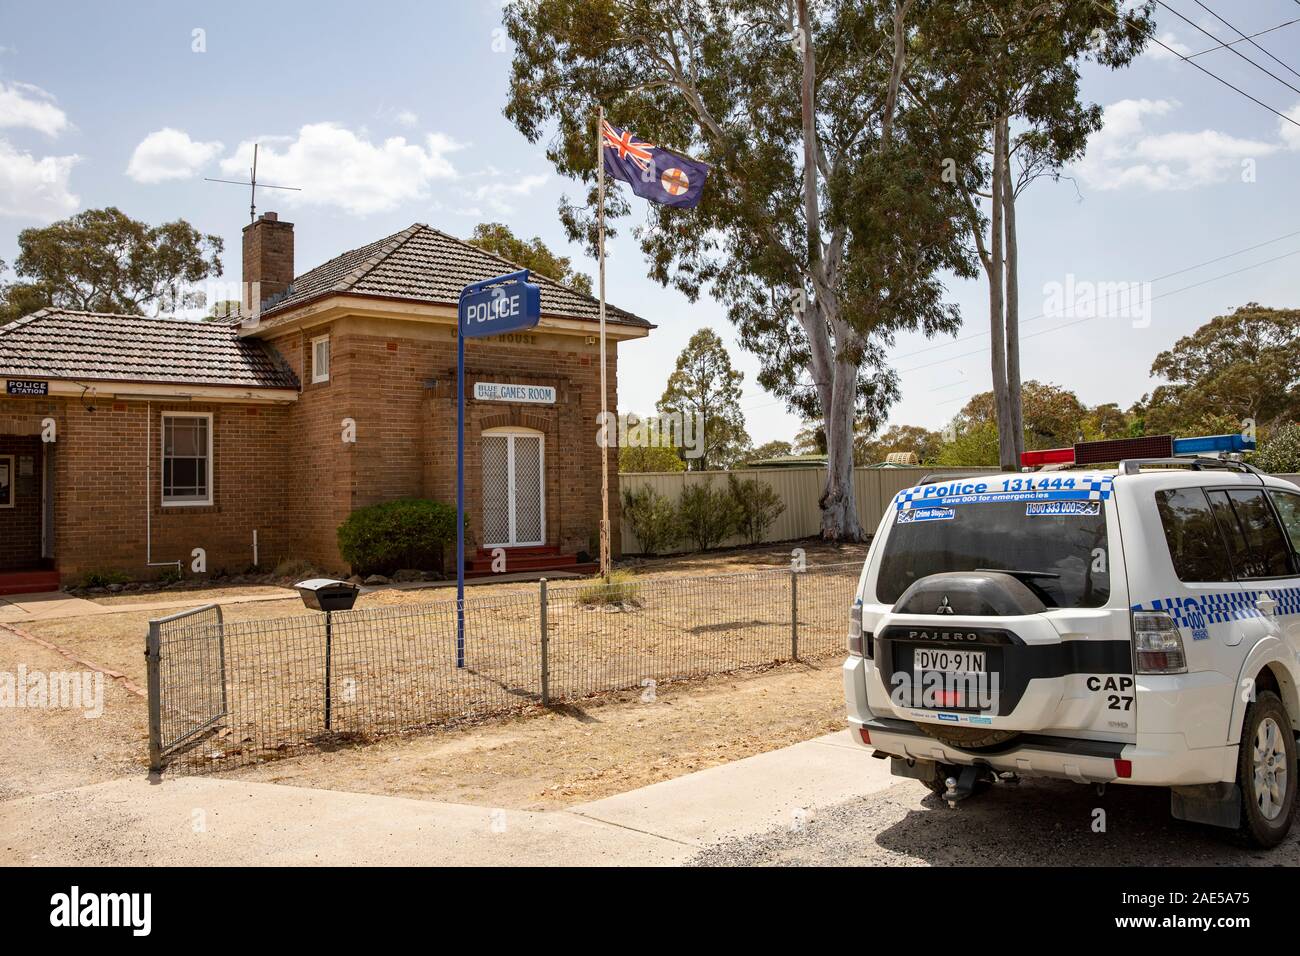 Australian police and court house building with police car, Capertee a small village in regional new south wales,Australia,2019 Stock Photo